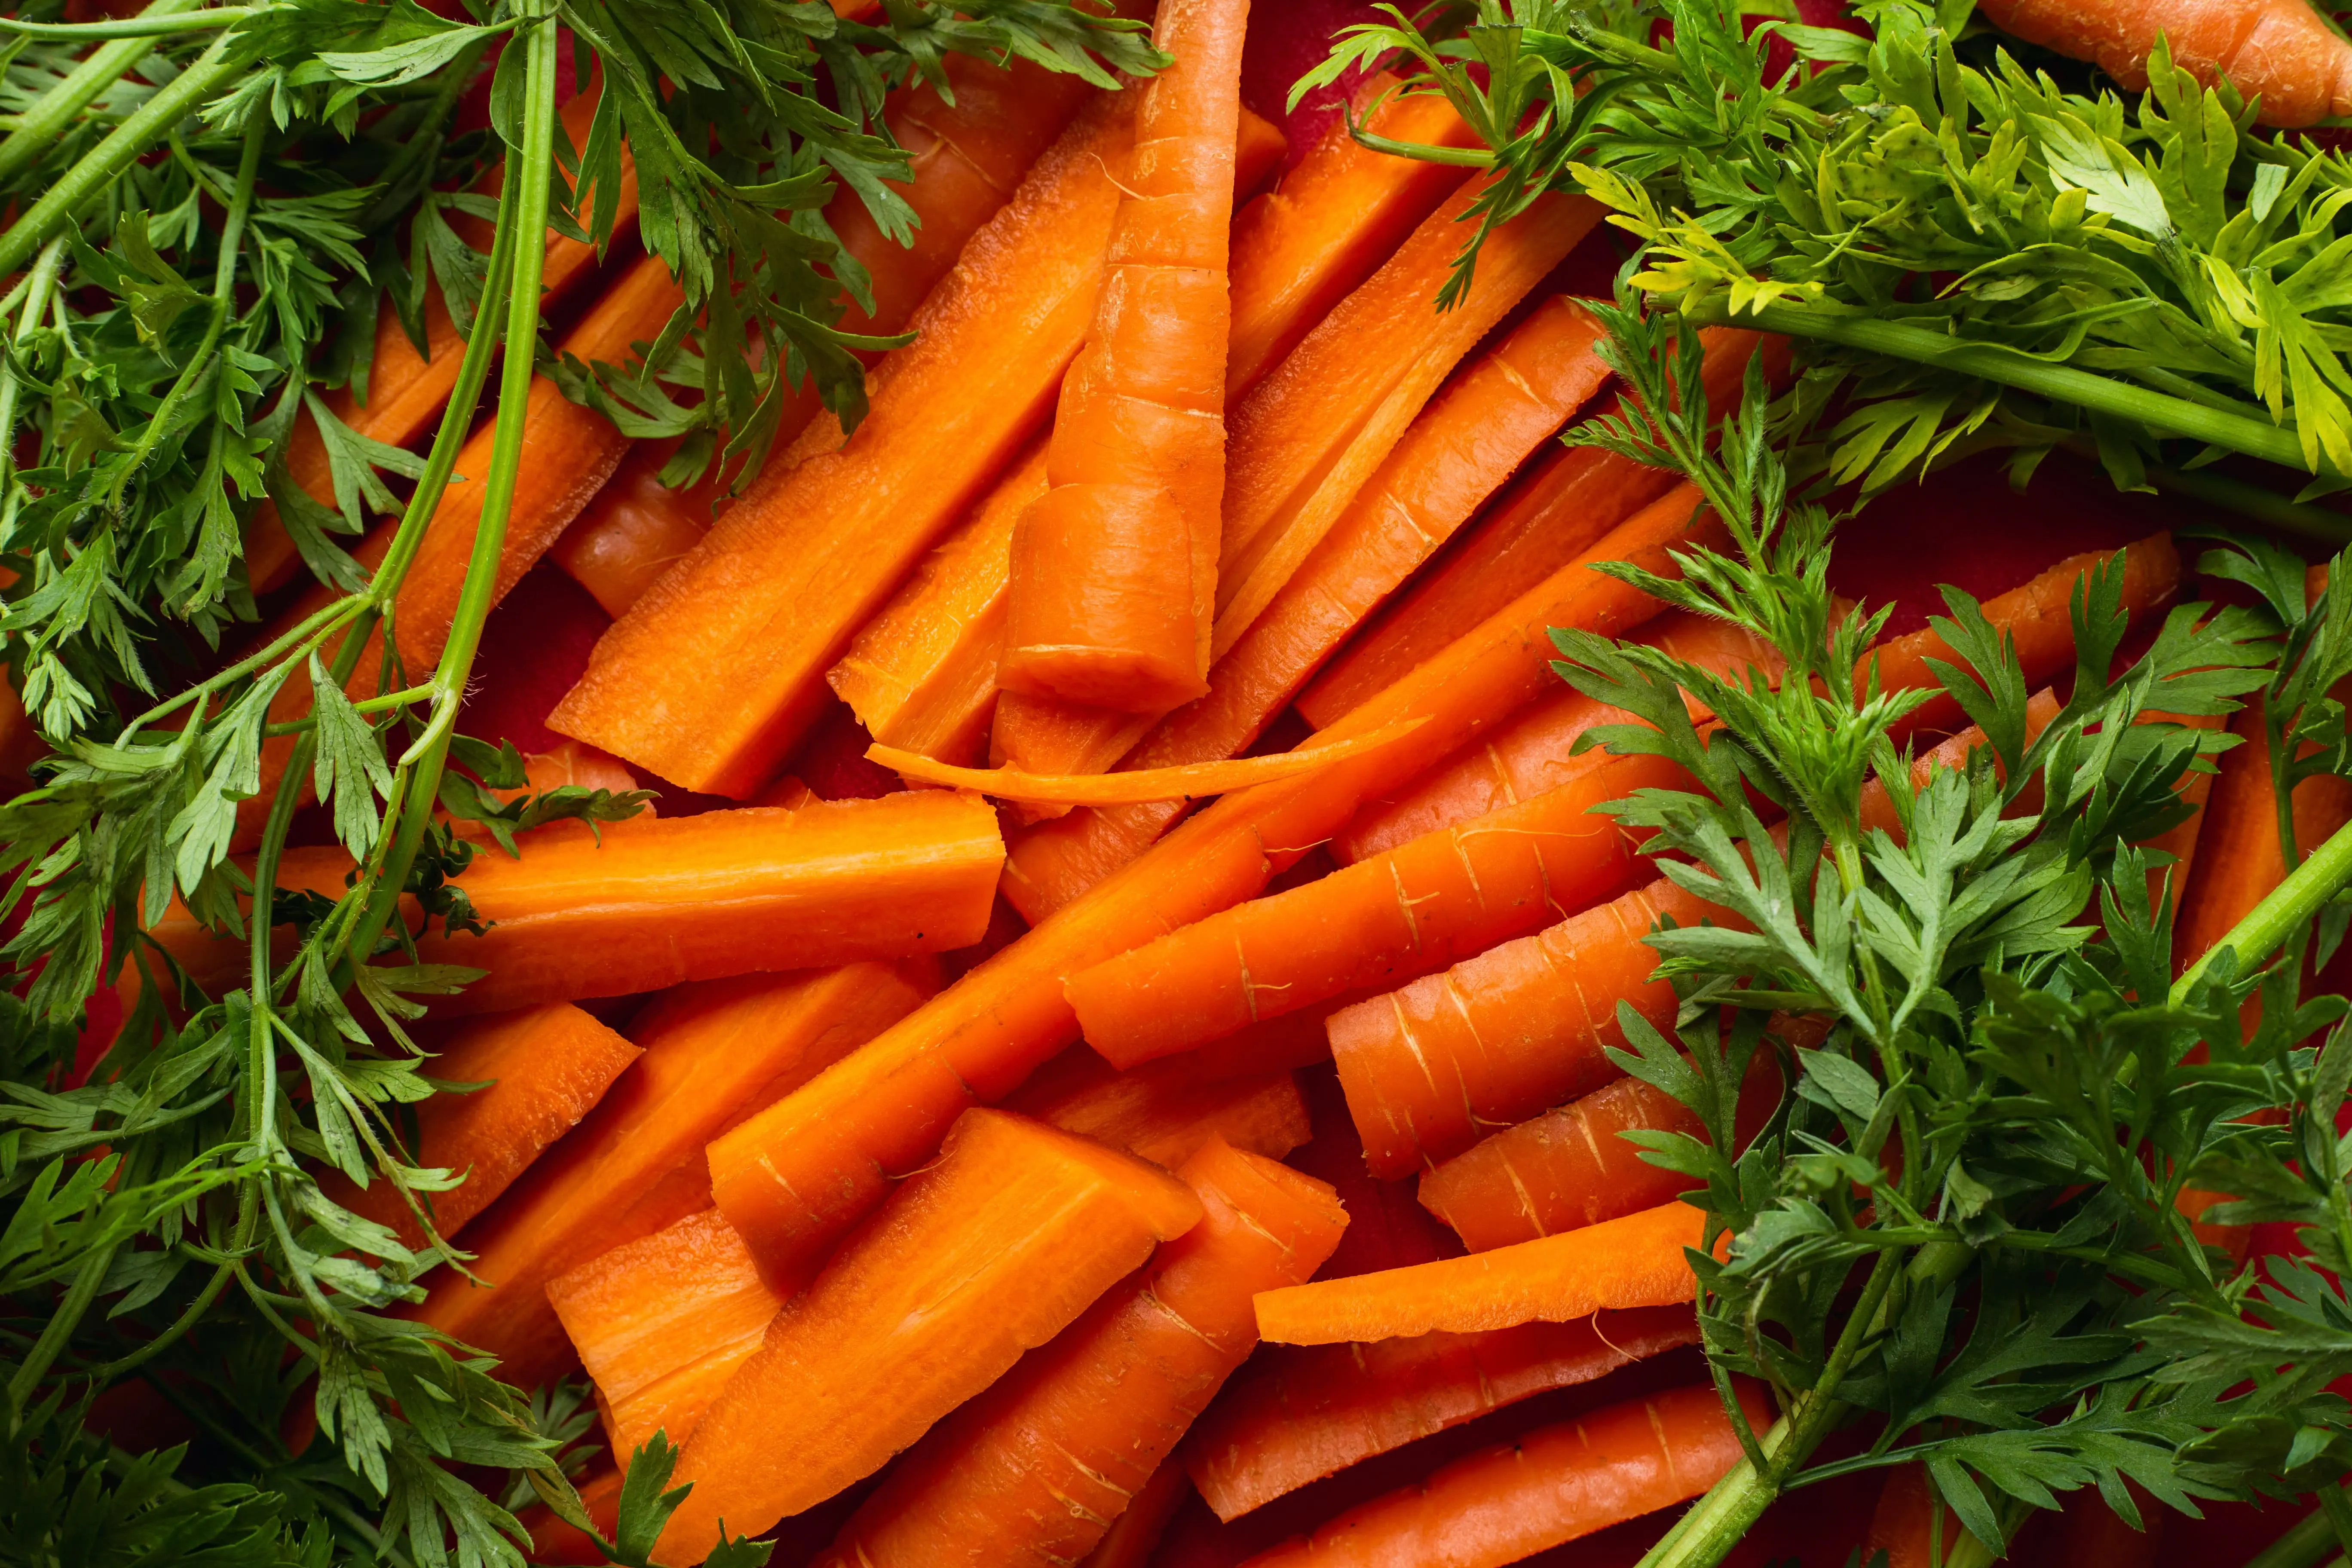 Are Carrots Actually Good for My Eyes?